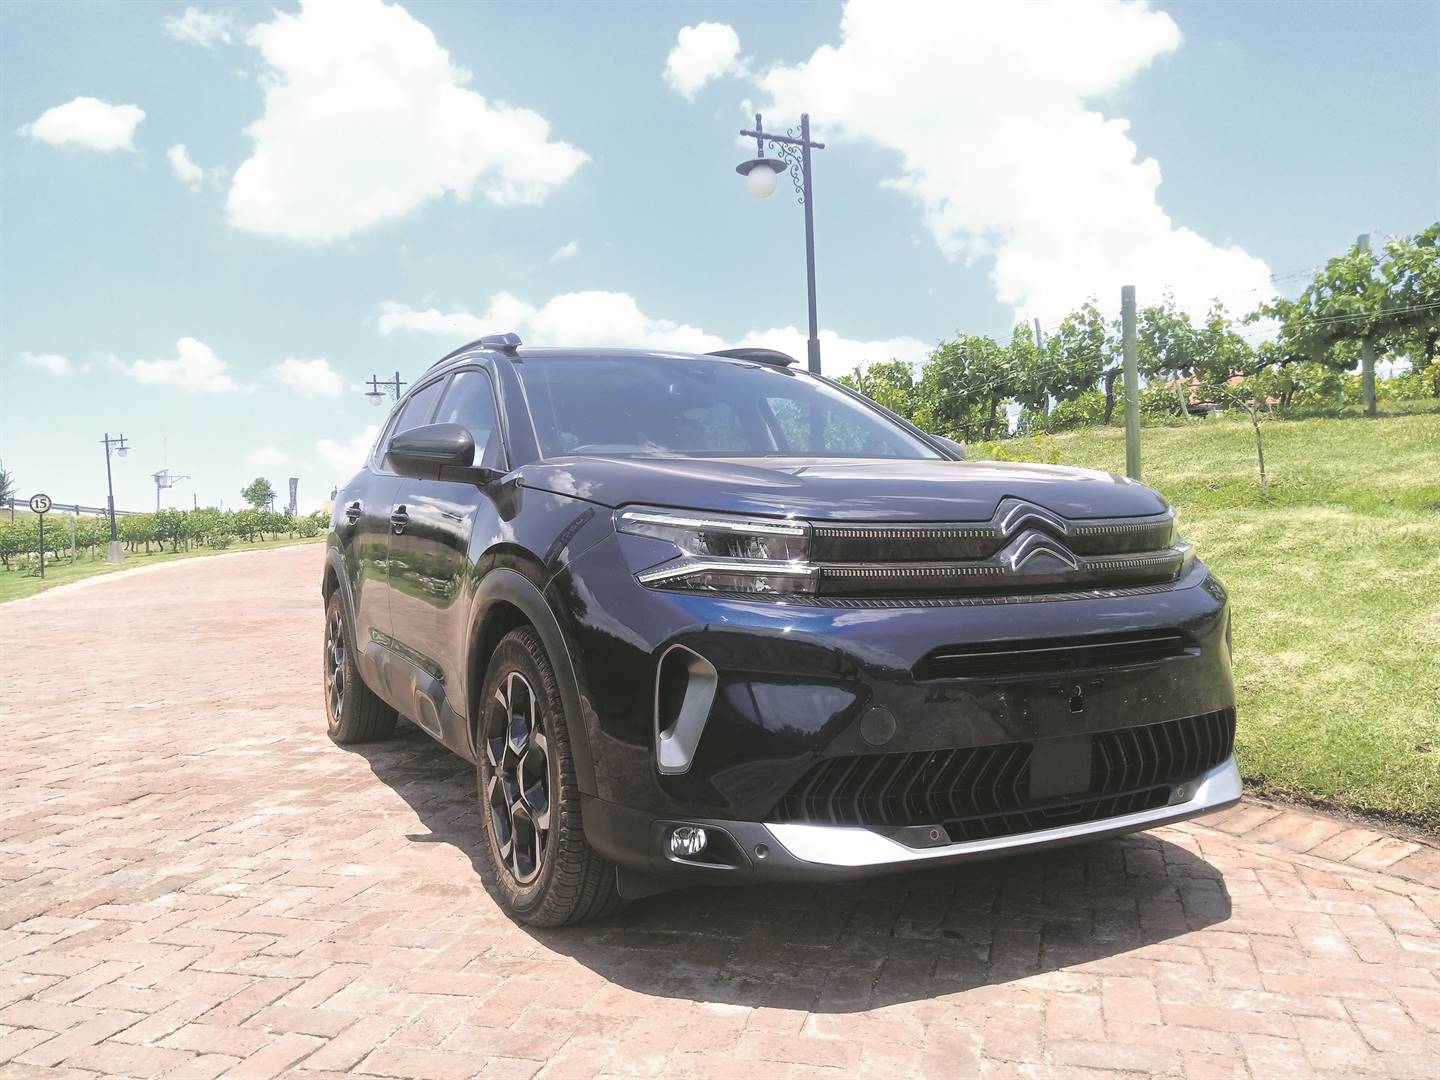 The Citroen C5 Aircross drives smoothly on gravel and has a smart interior (inset). Photos by   Njabulo Ngcobo